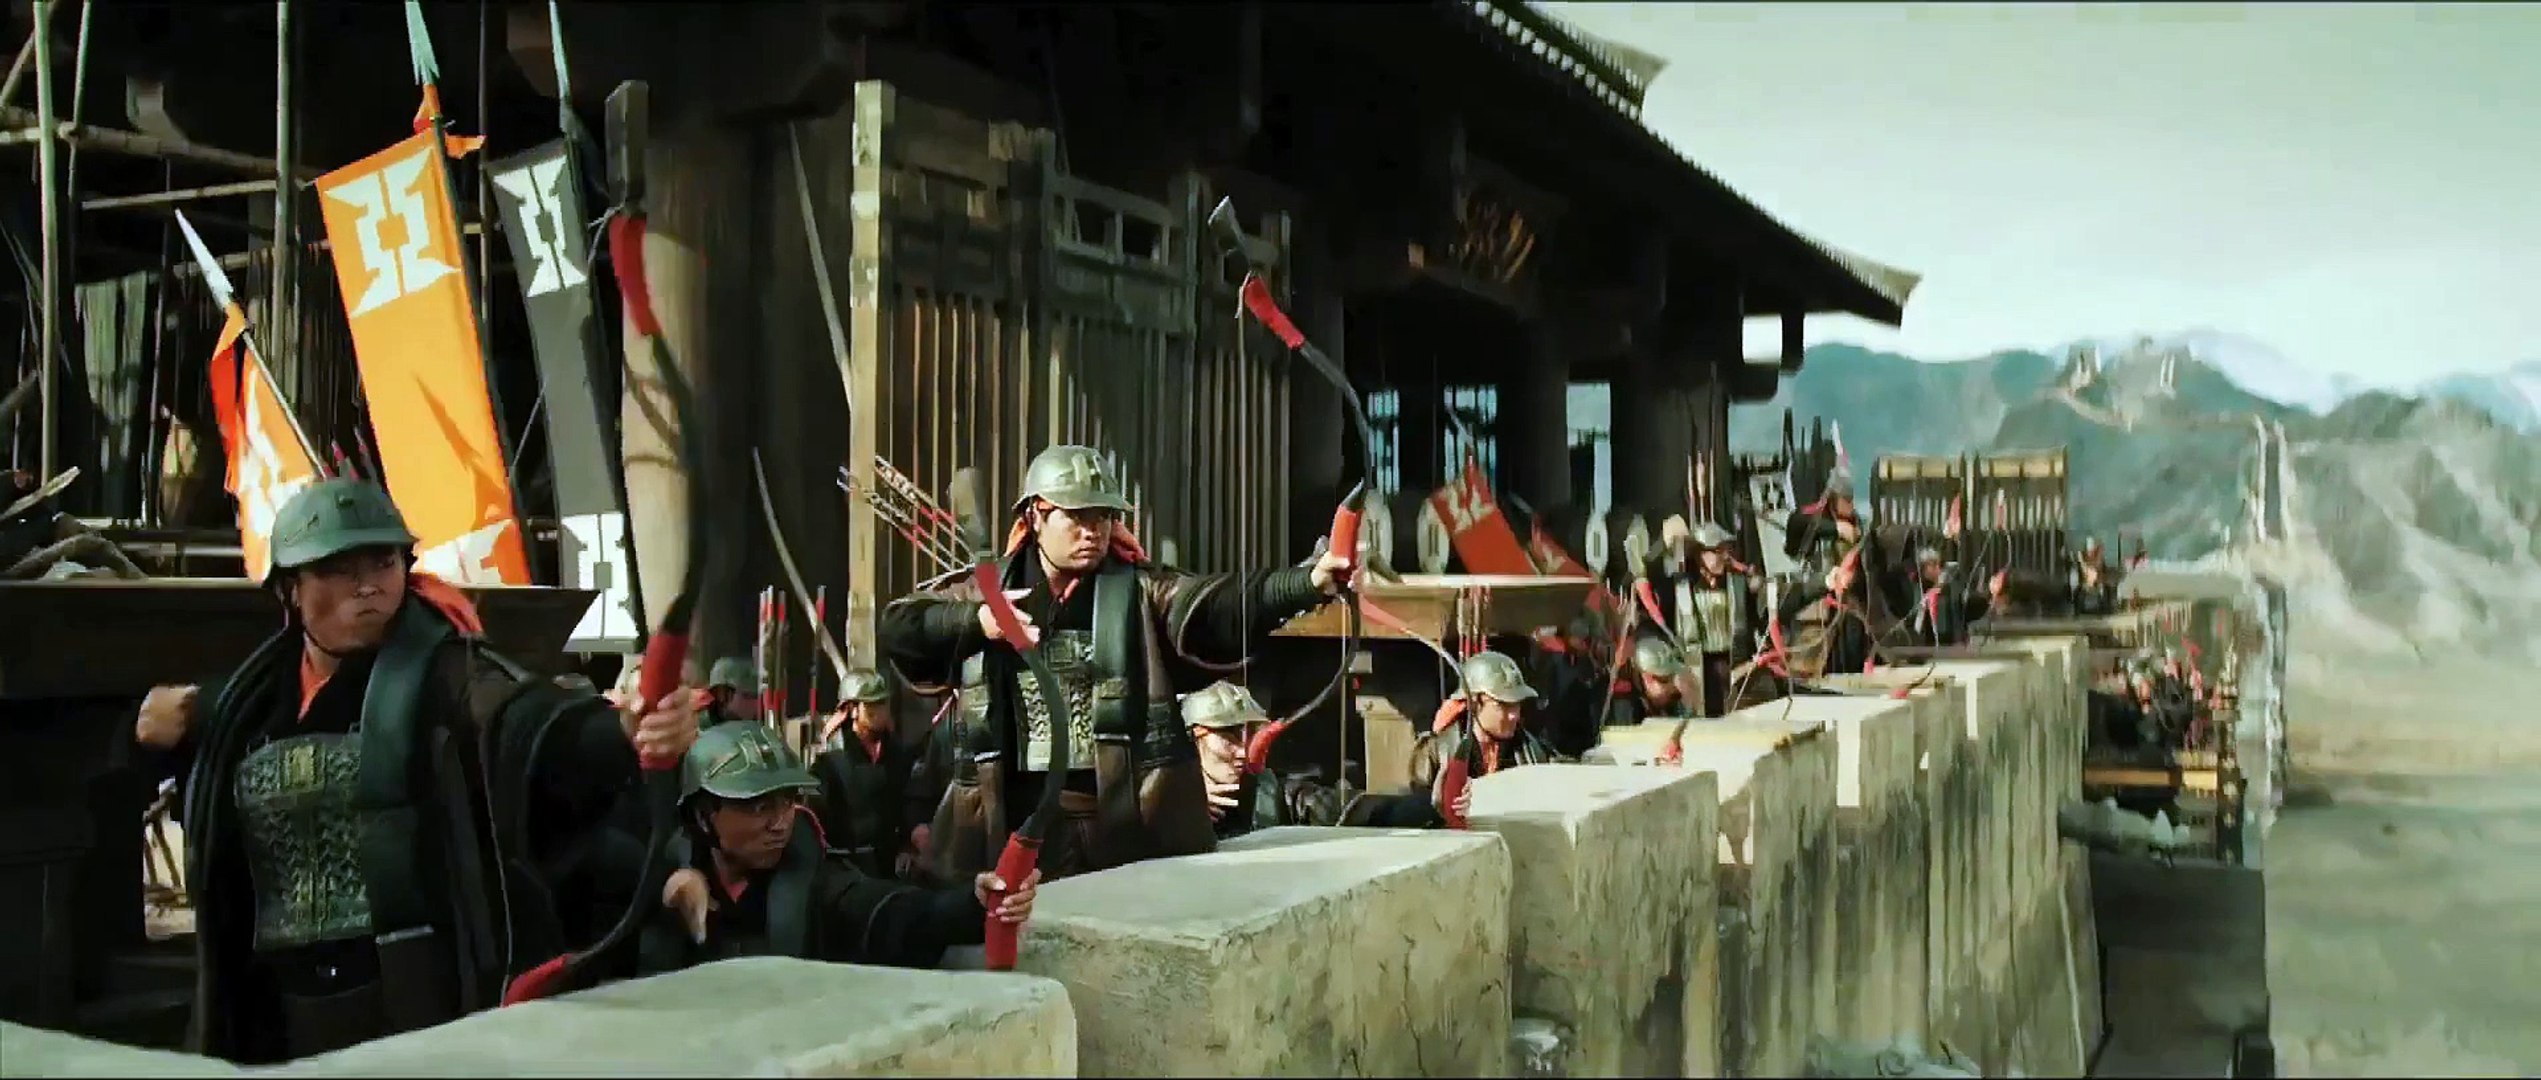 Dragon Blade - Official Trailer - video Dailymotion